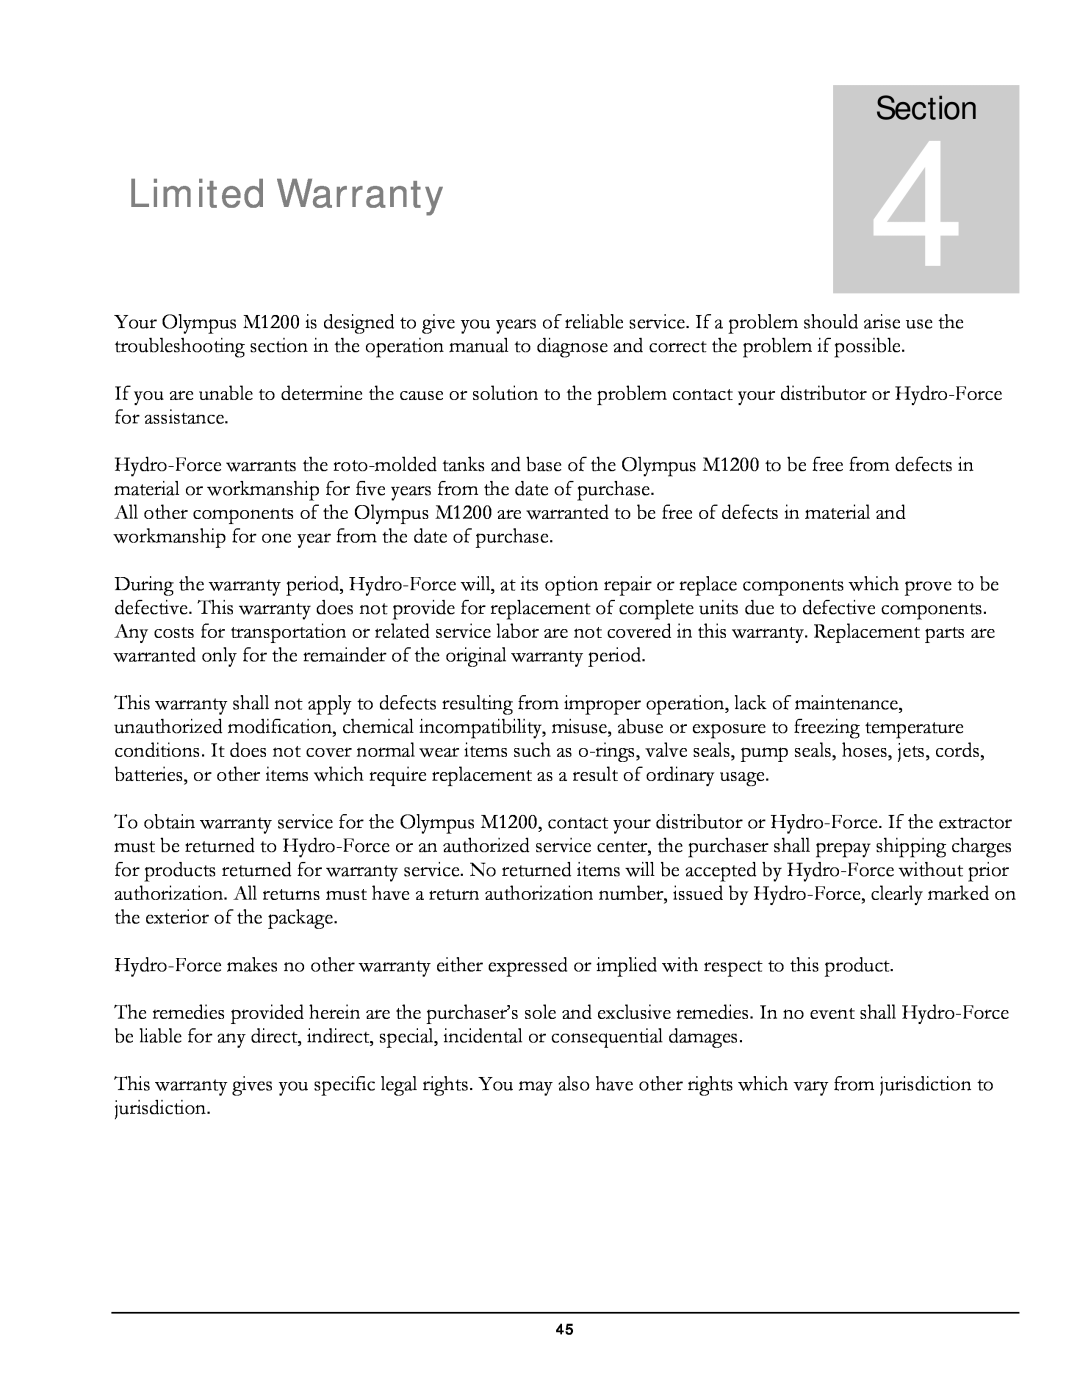 Olympus M1200 manual Limited Warranty, 4Section 